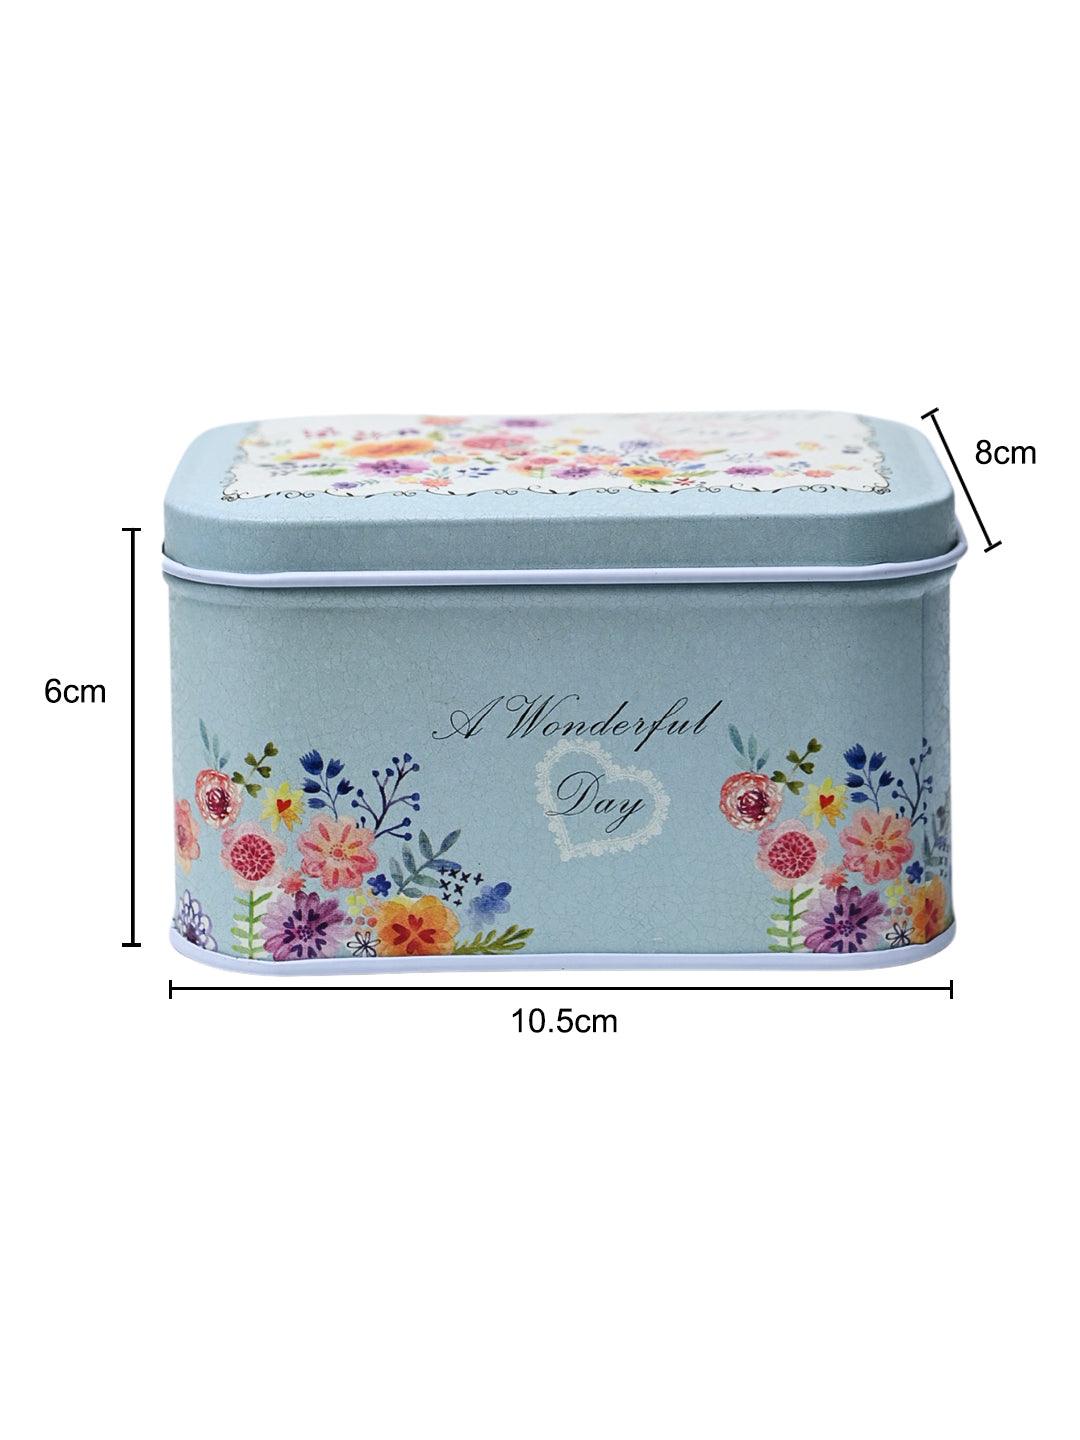 Floral Tin Storage Box Container - Set Of 6, Blue - MARKET99